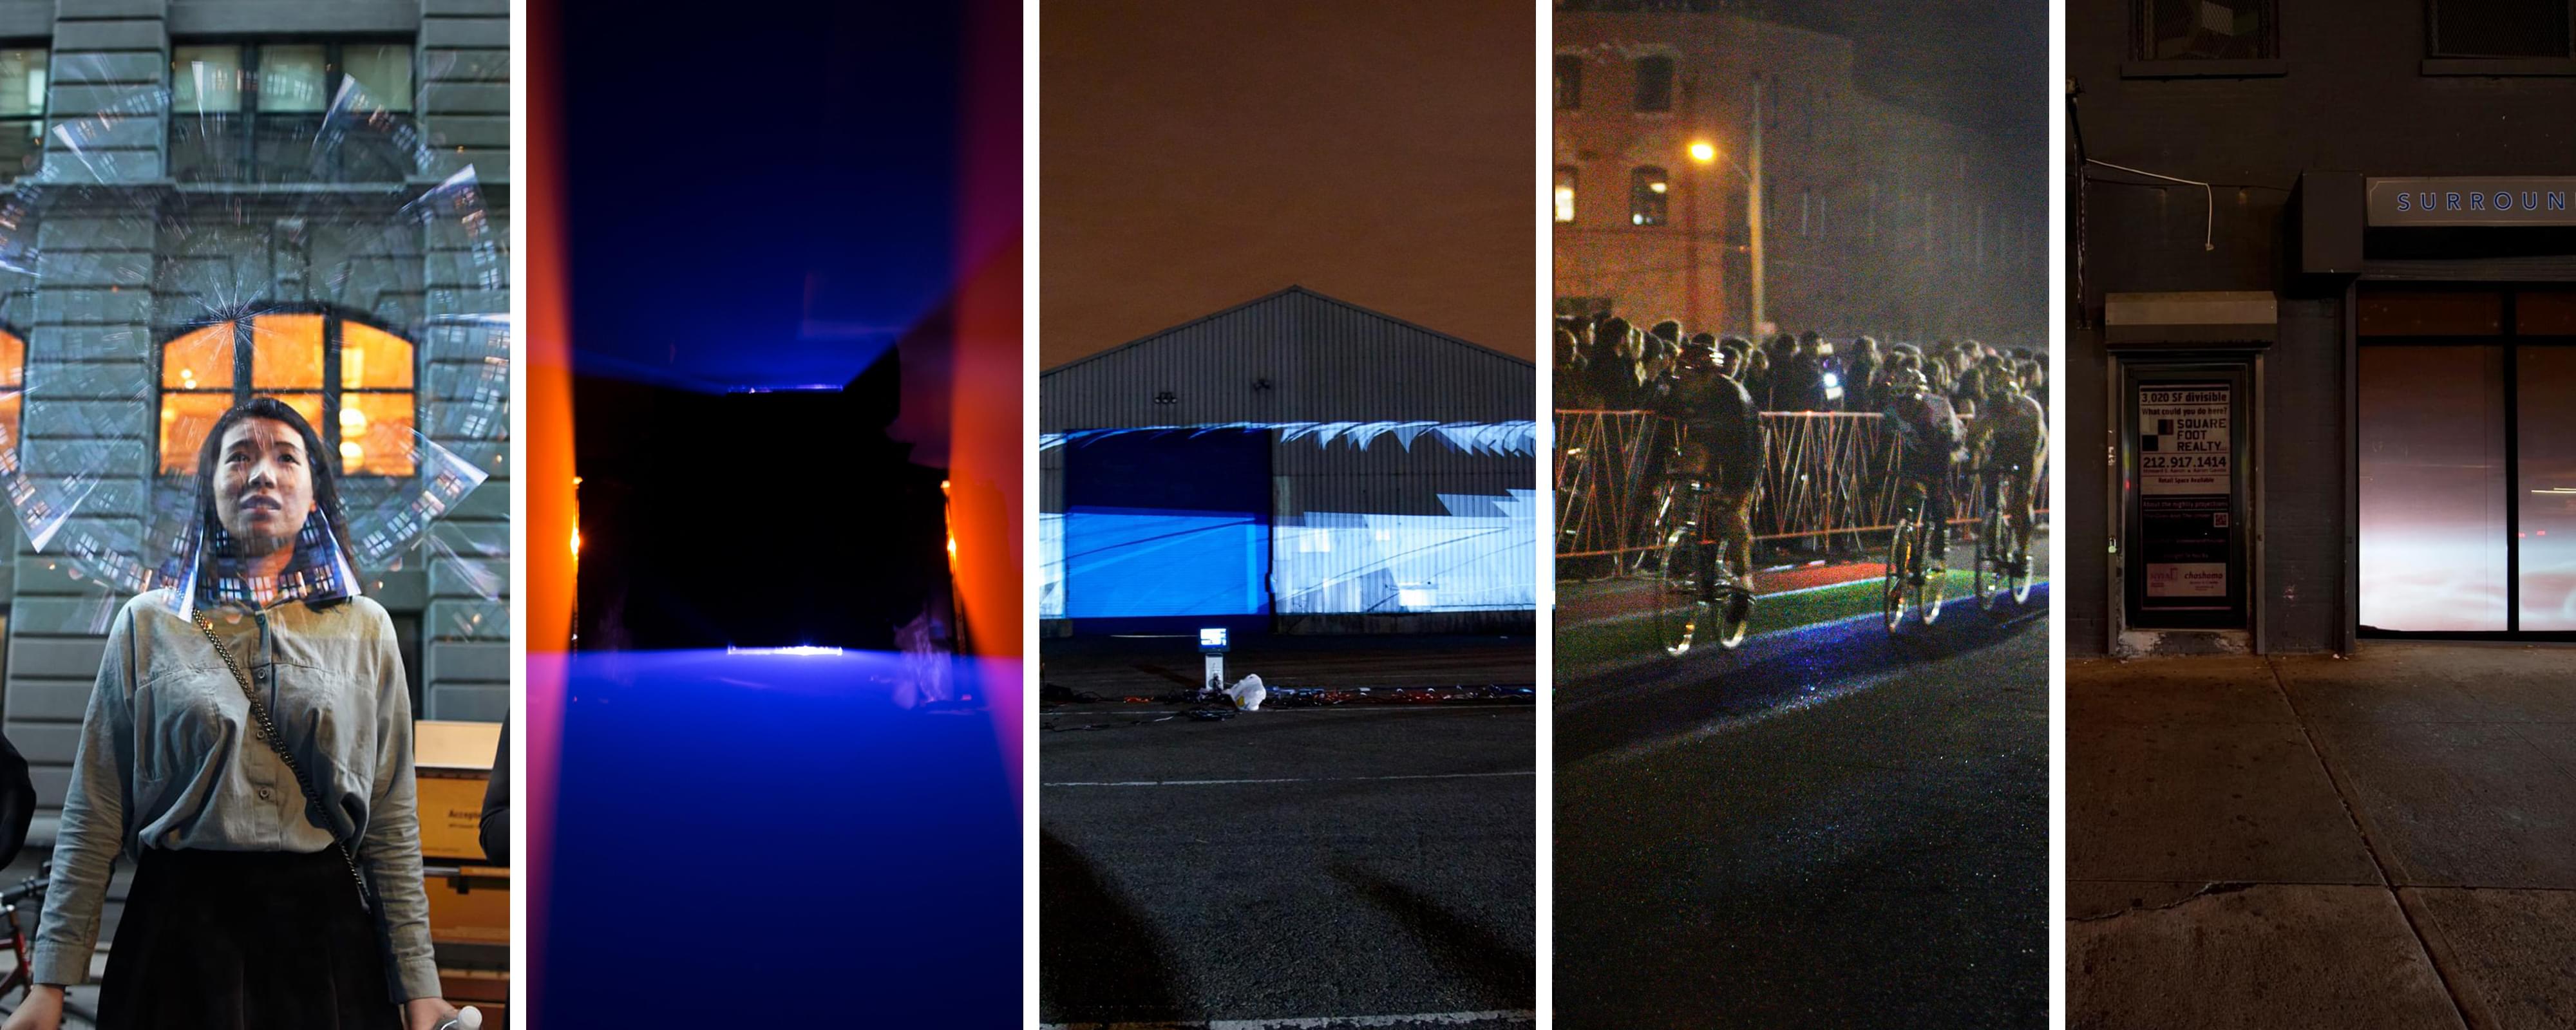 A compilation of 5 photos of different nighttime video installations arranged in vertical strips